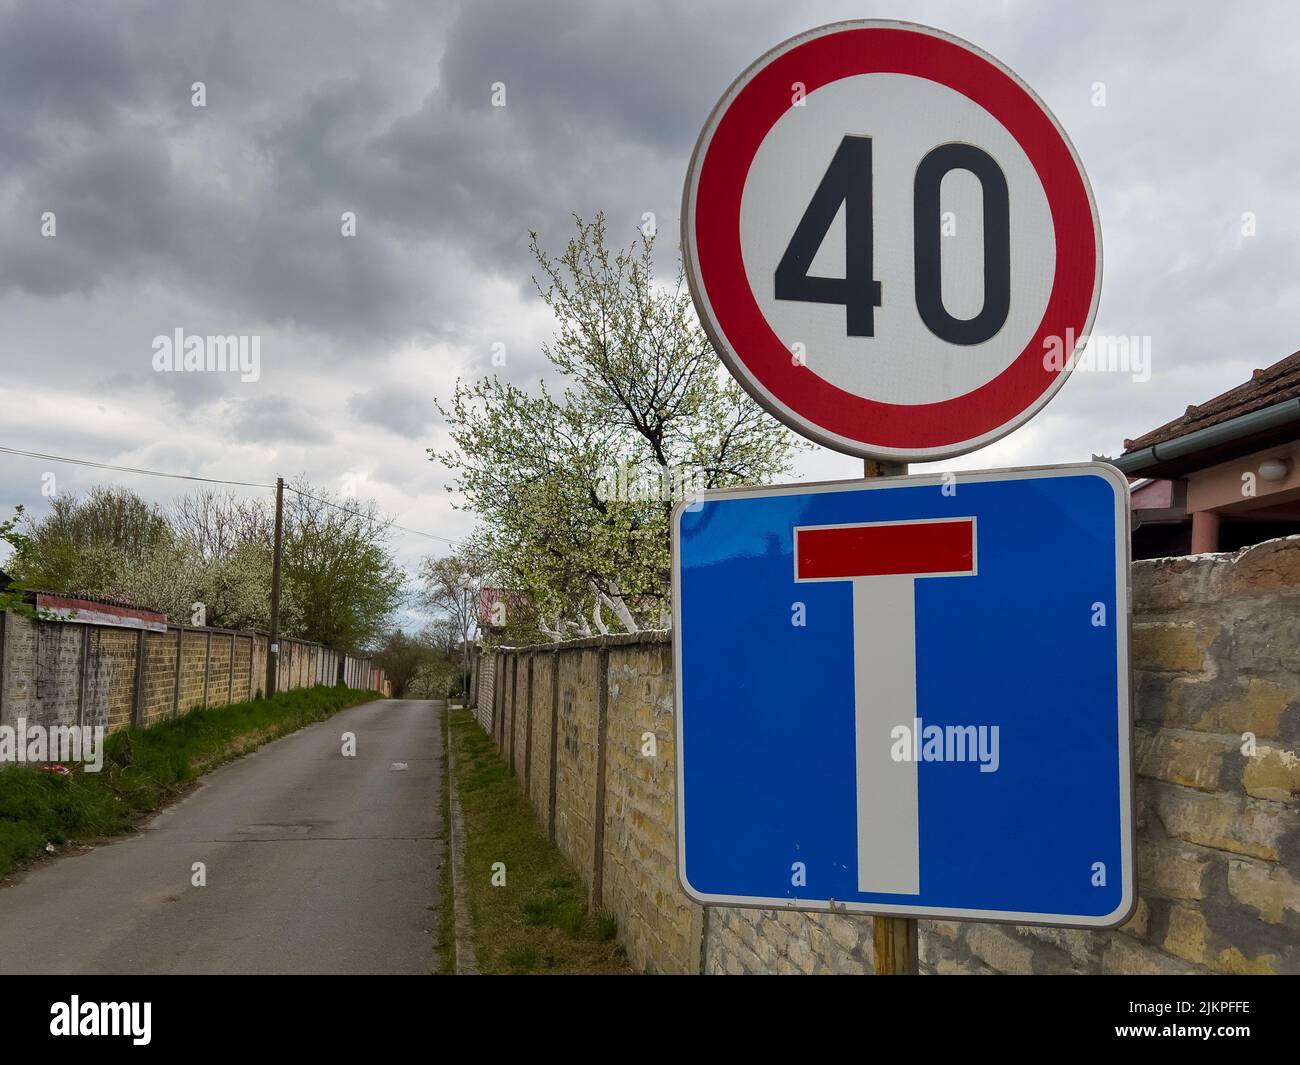 A closeup shot of road signs on the street Banque D'Images